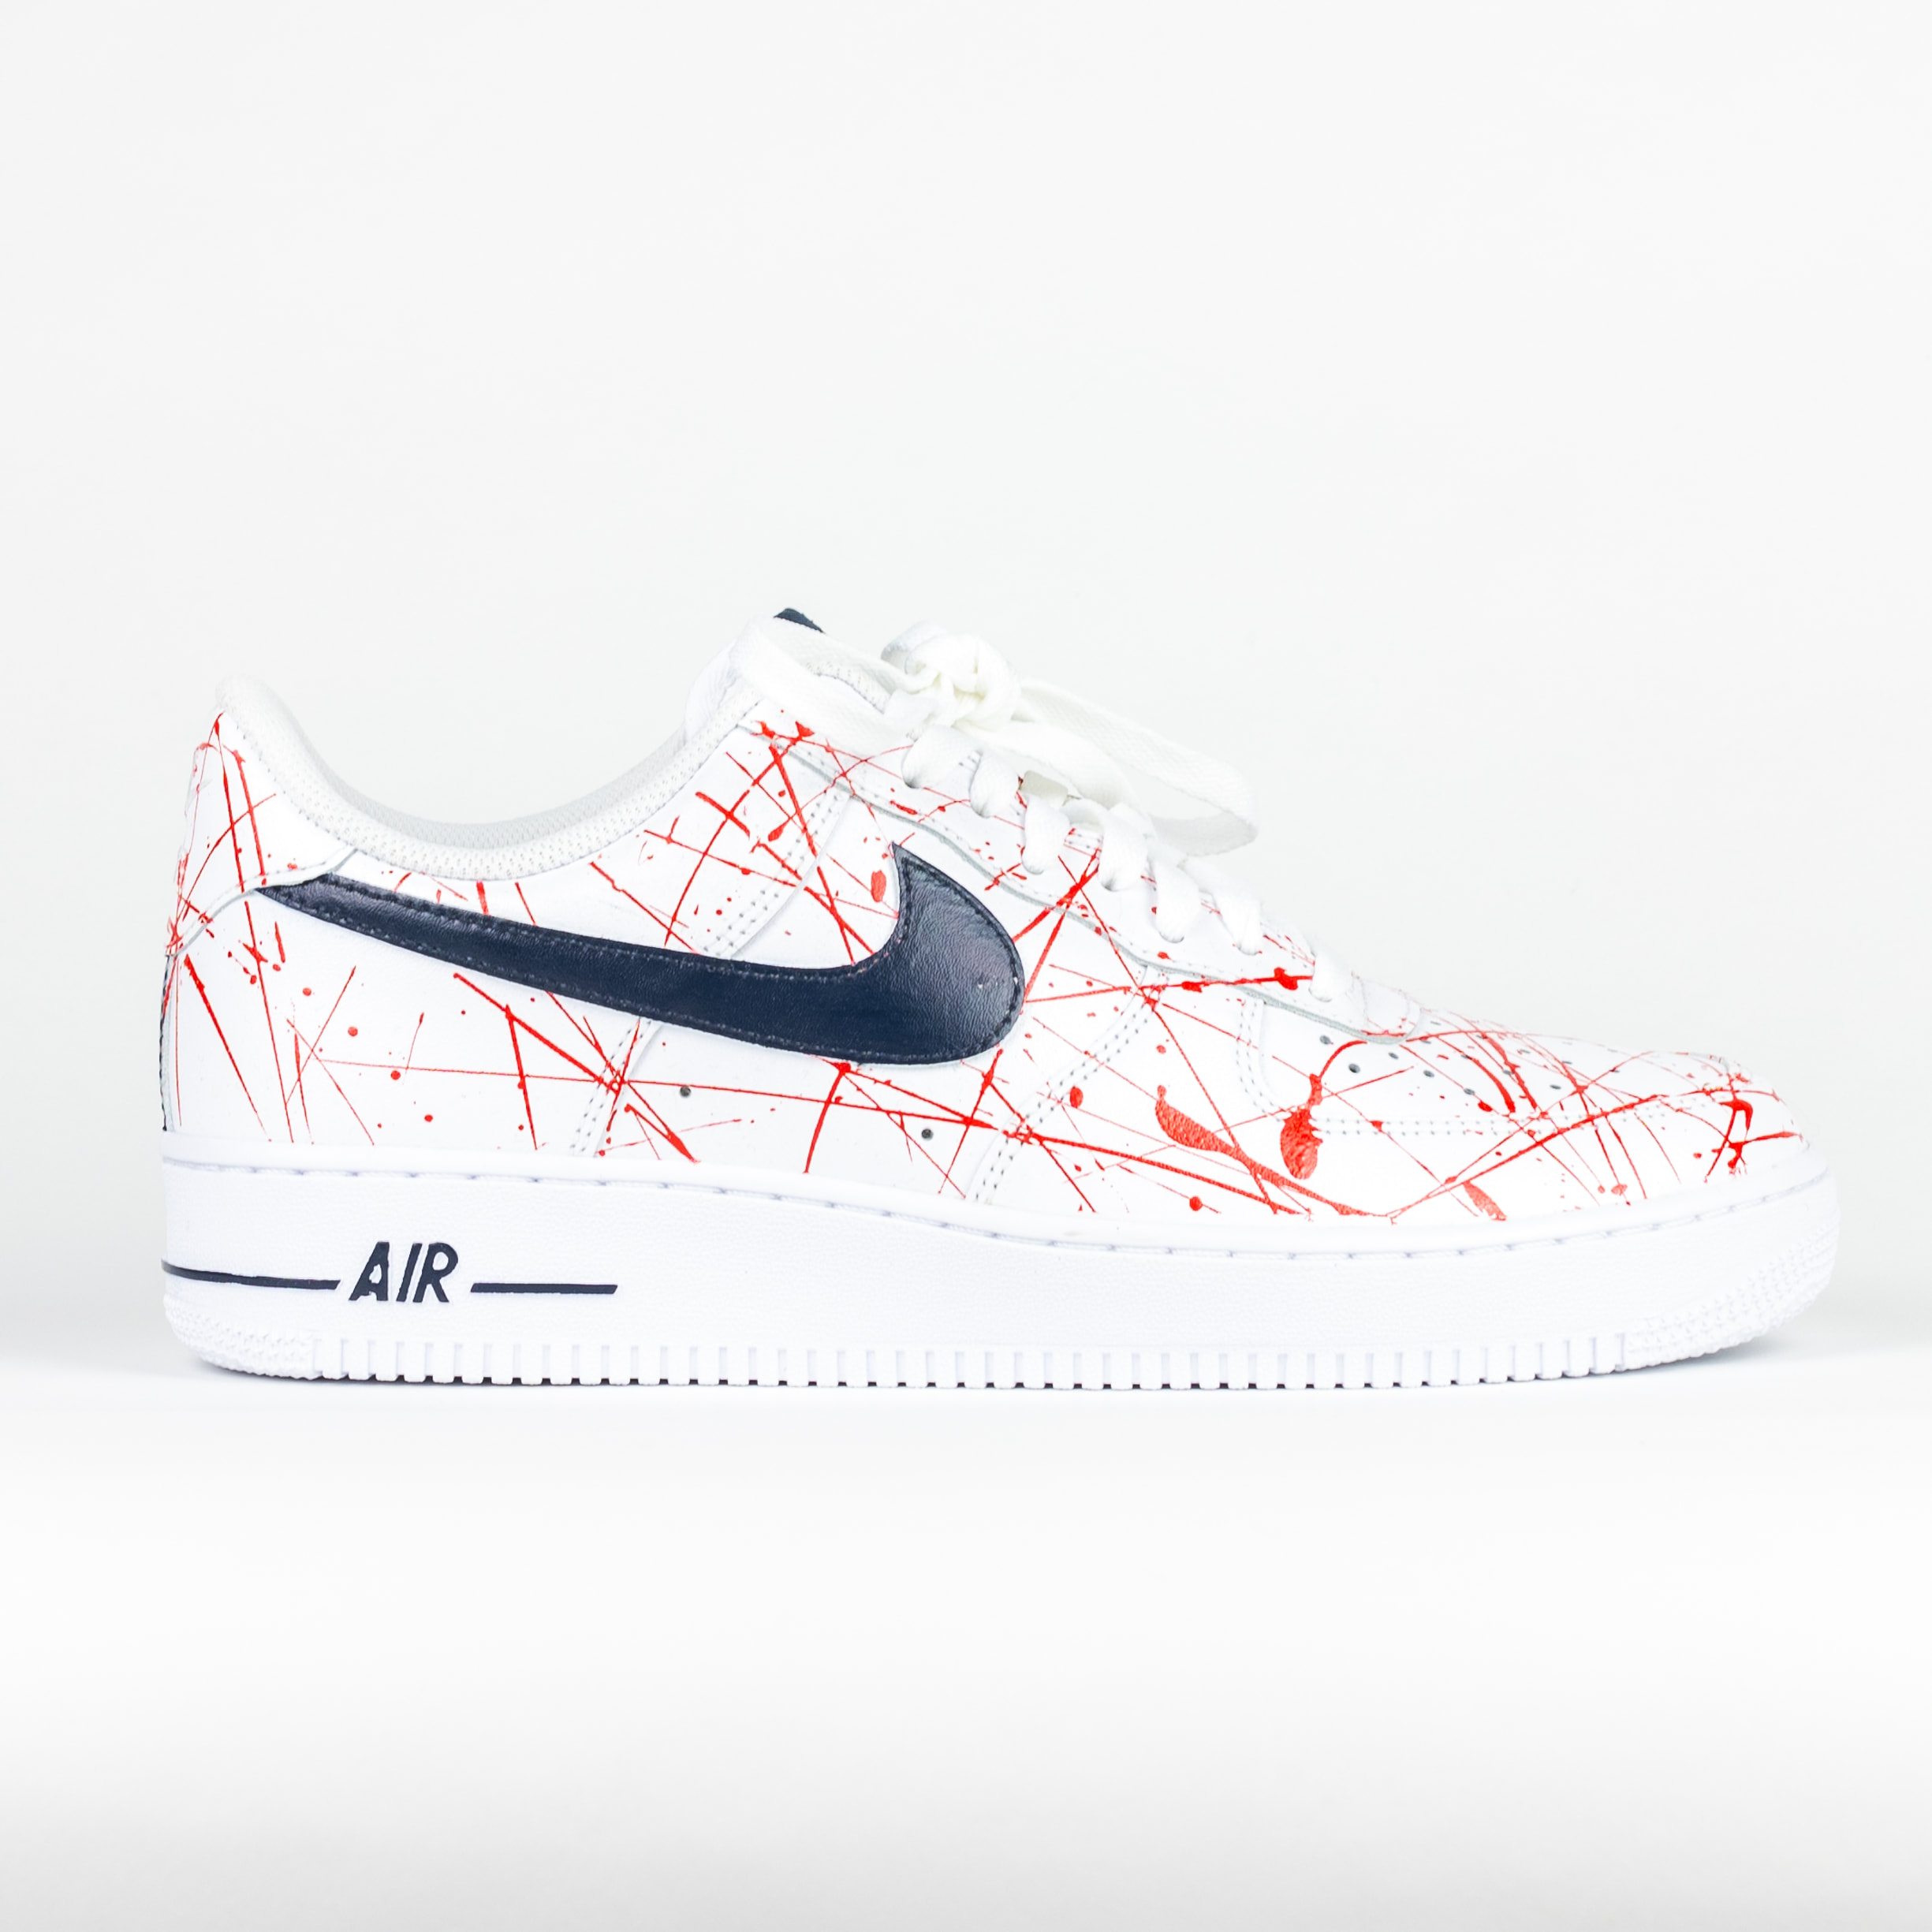 red and navy blue air forces